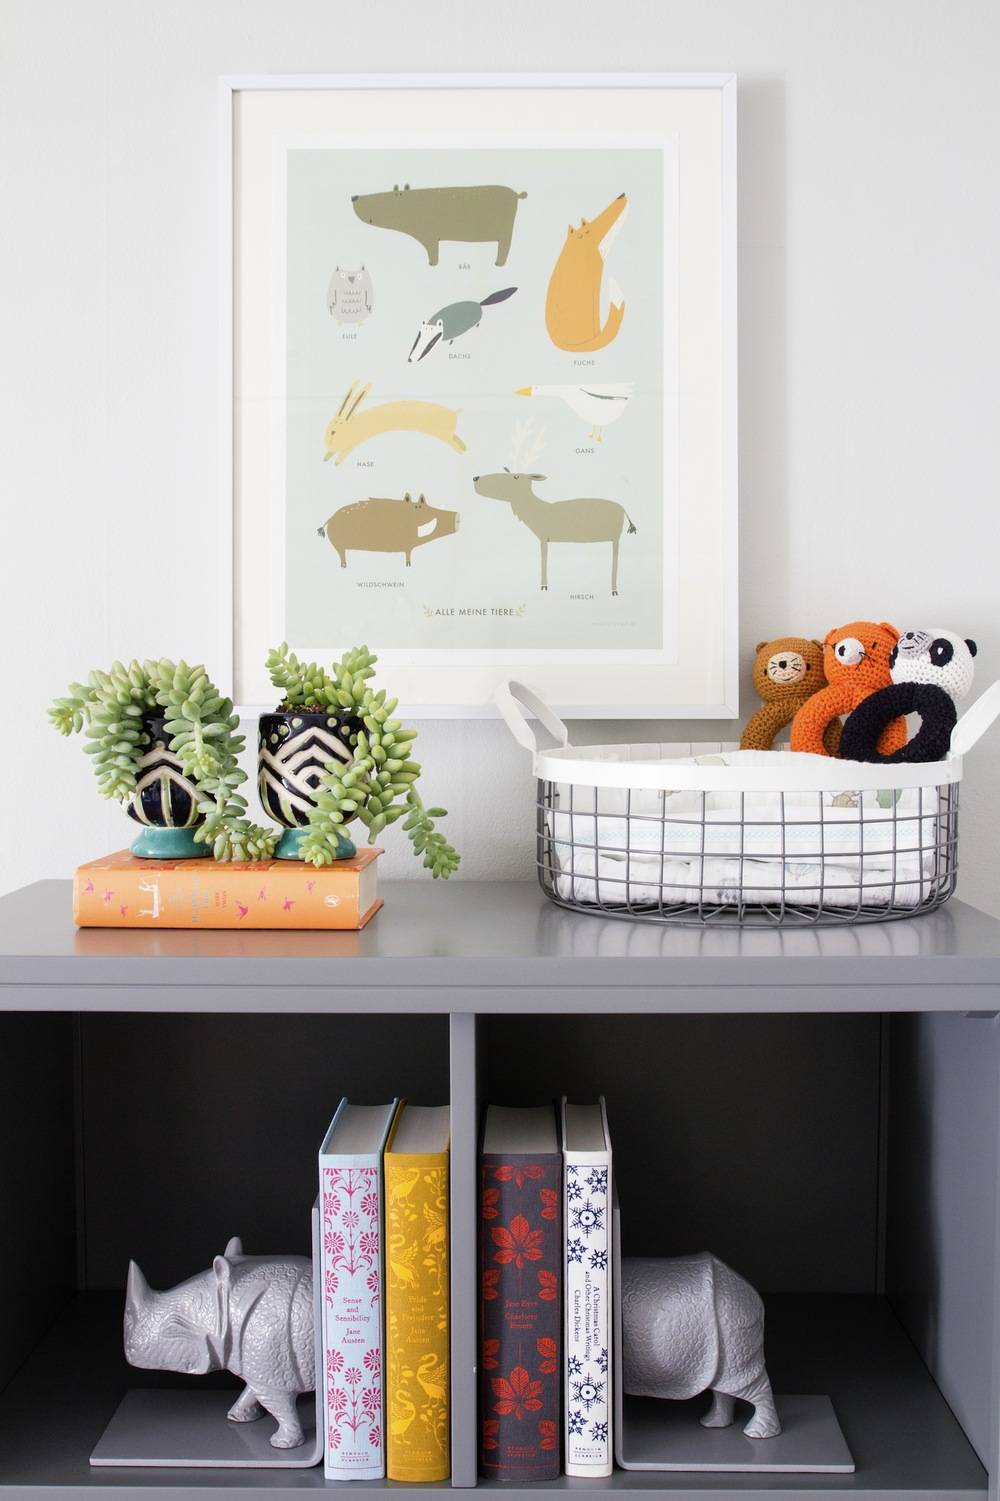 A gray shelf has books & plants on it under a picture frame.